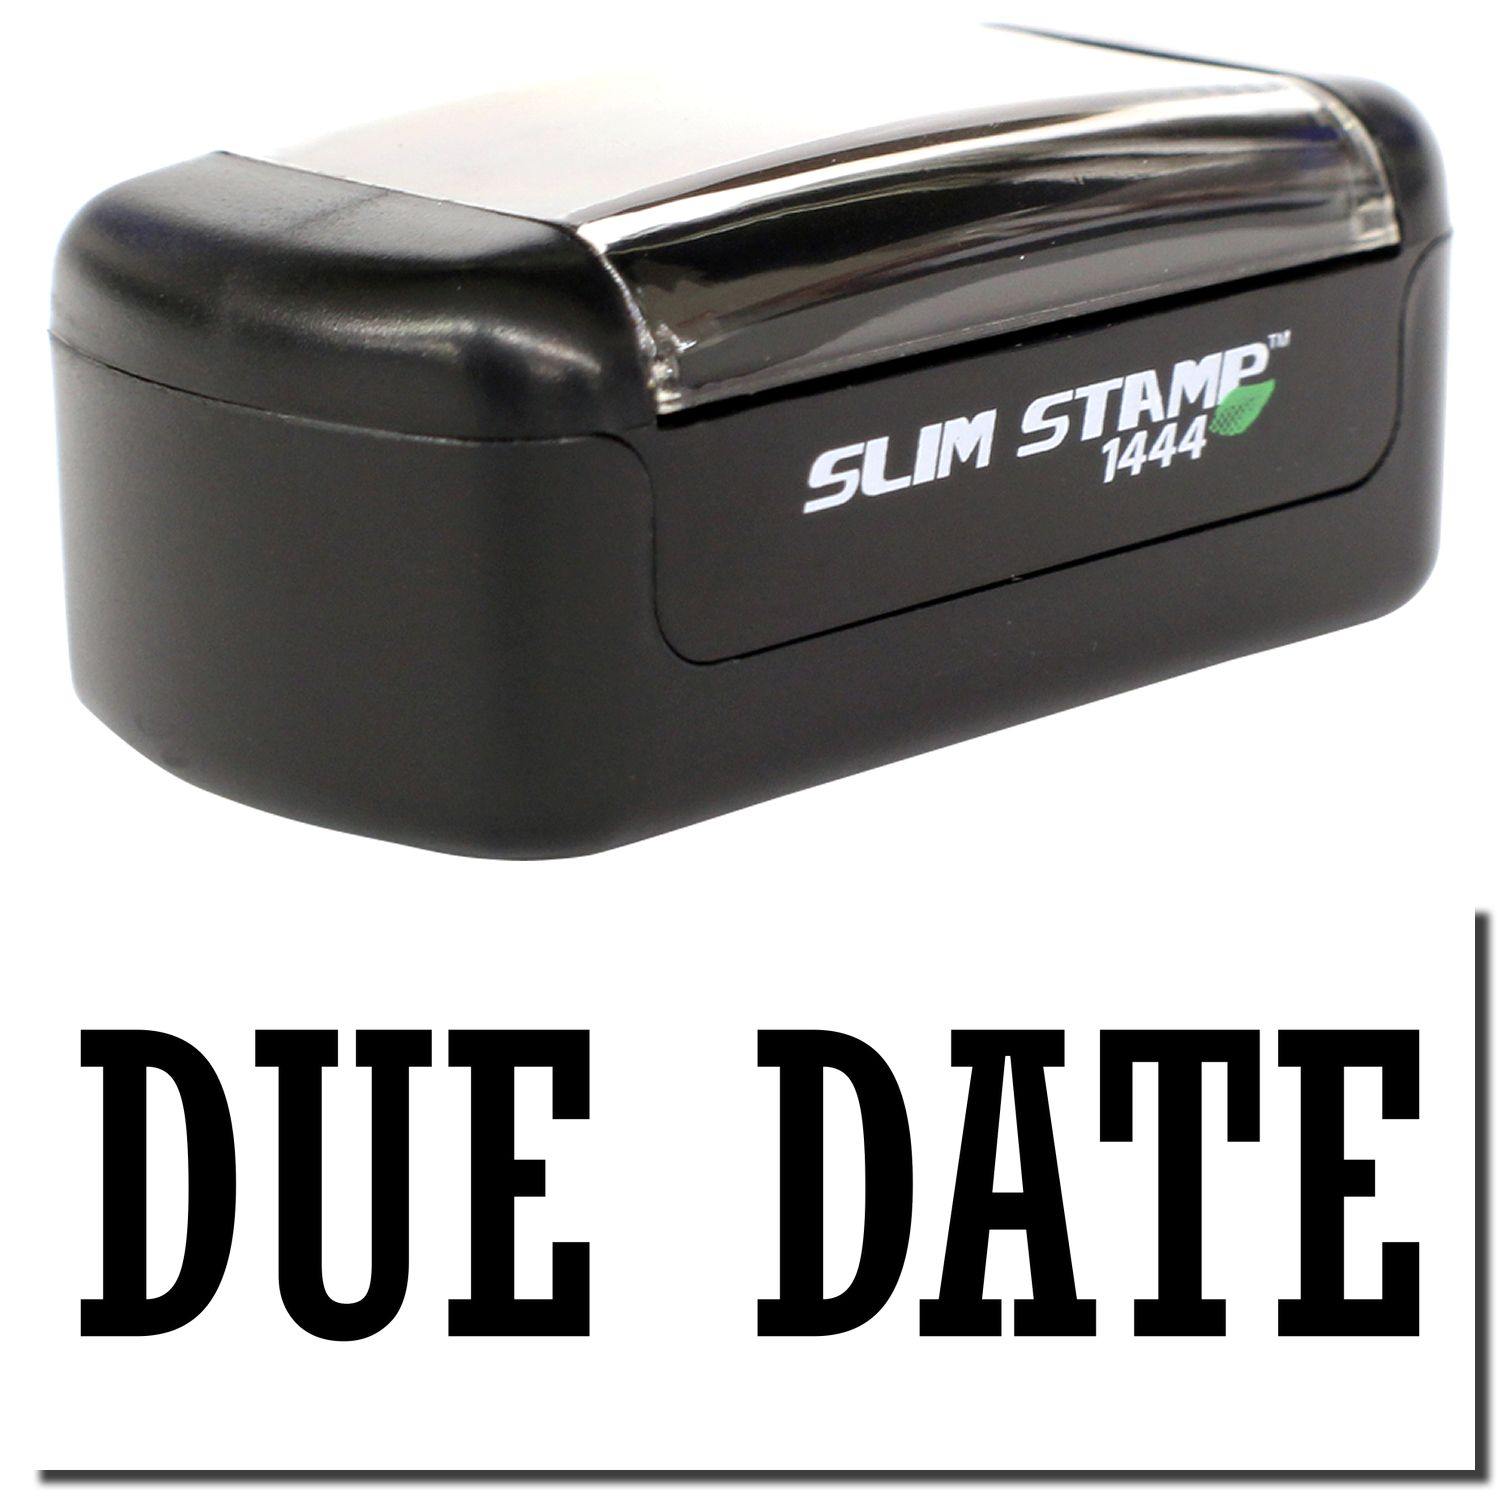 A stock office pre-inked stamp with a stamped image showing how the text "DUE DATE" is displayed after stamping.